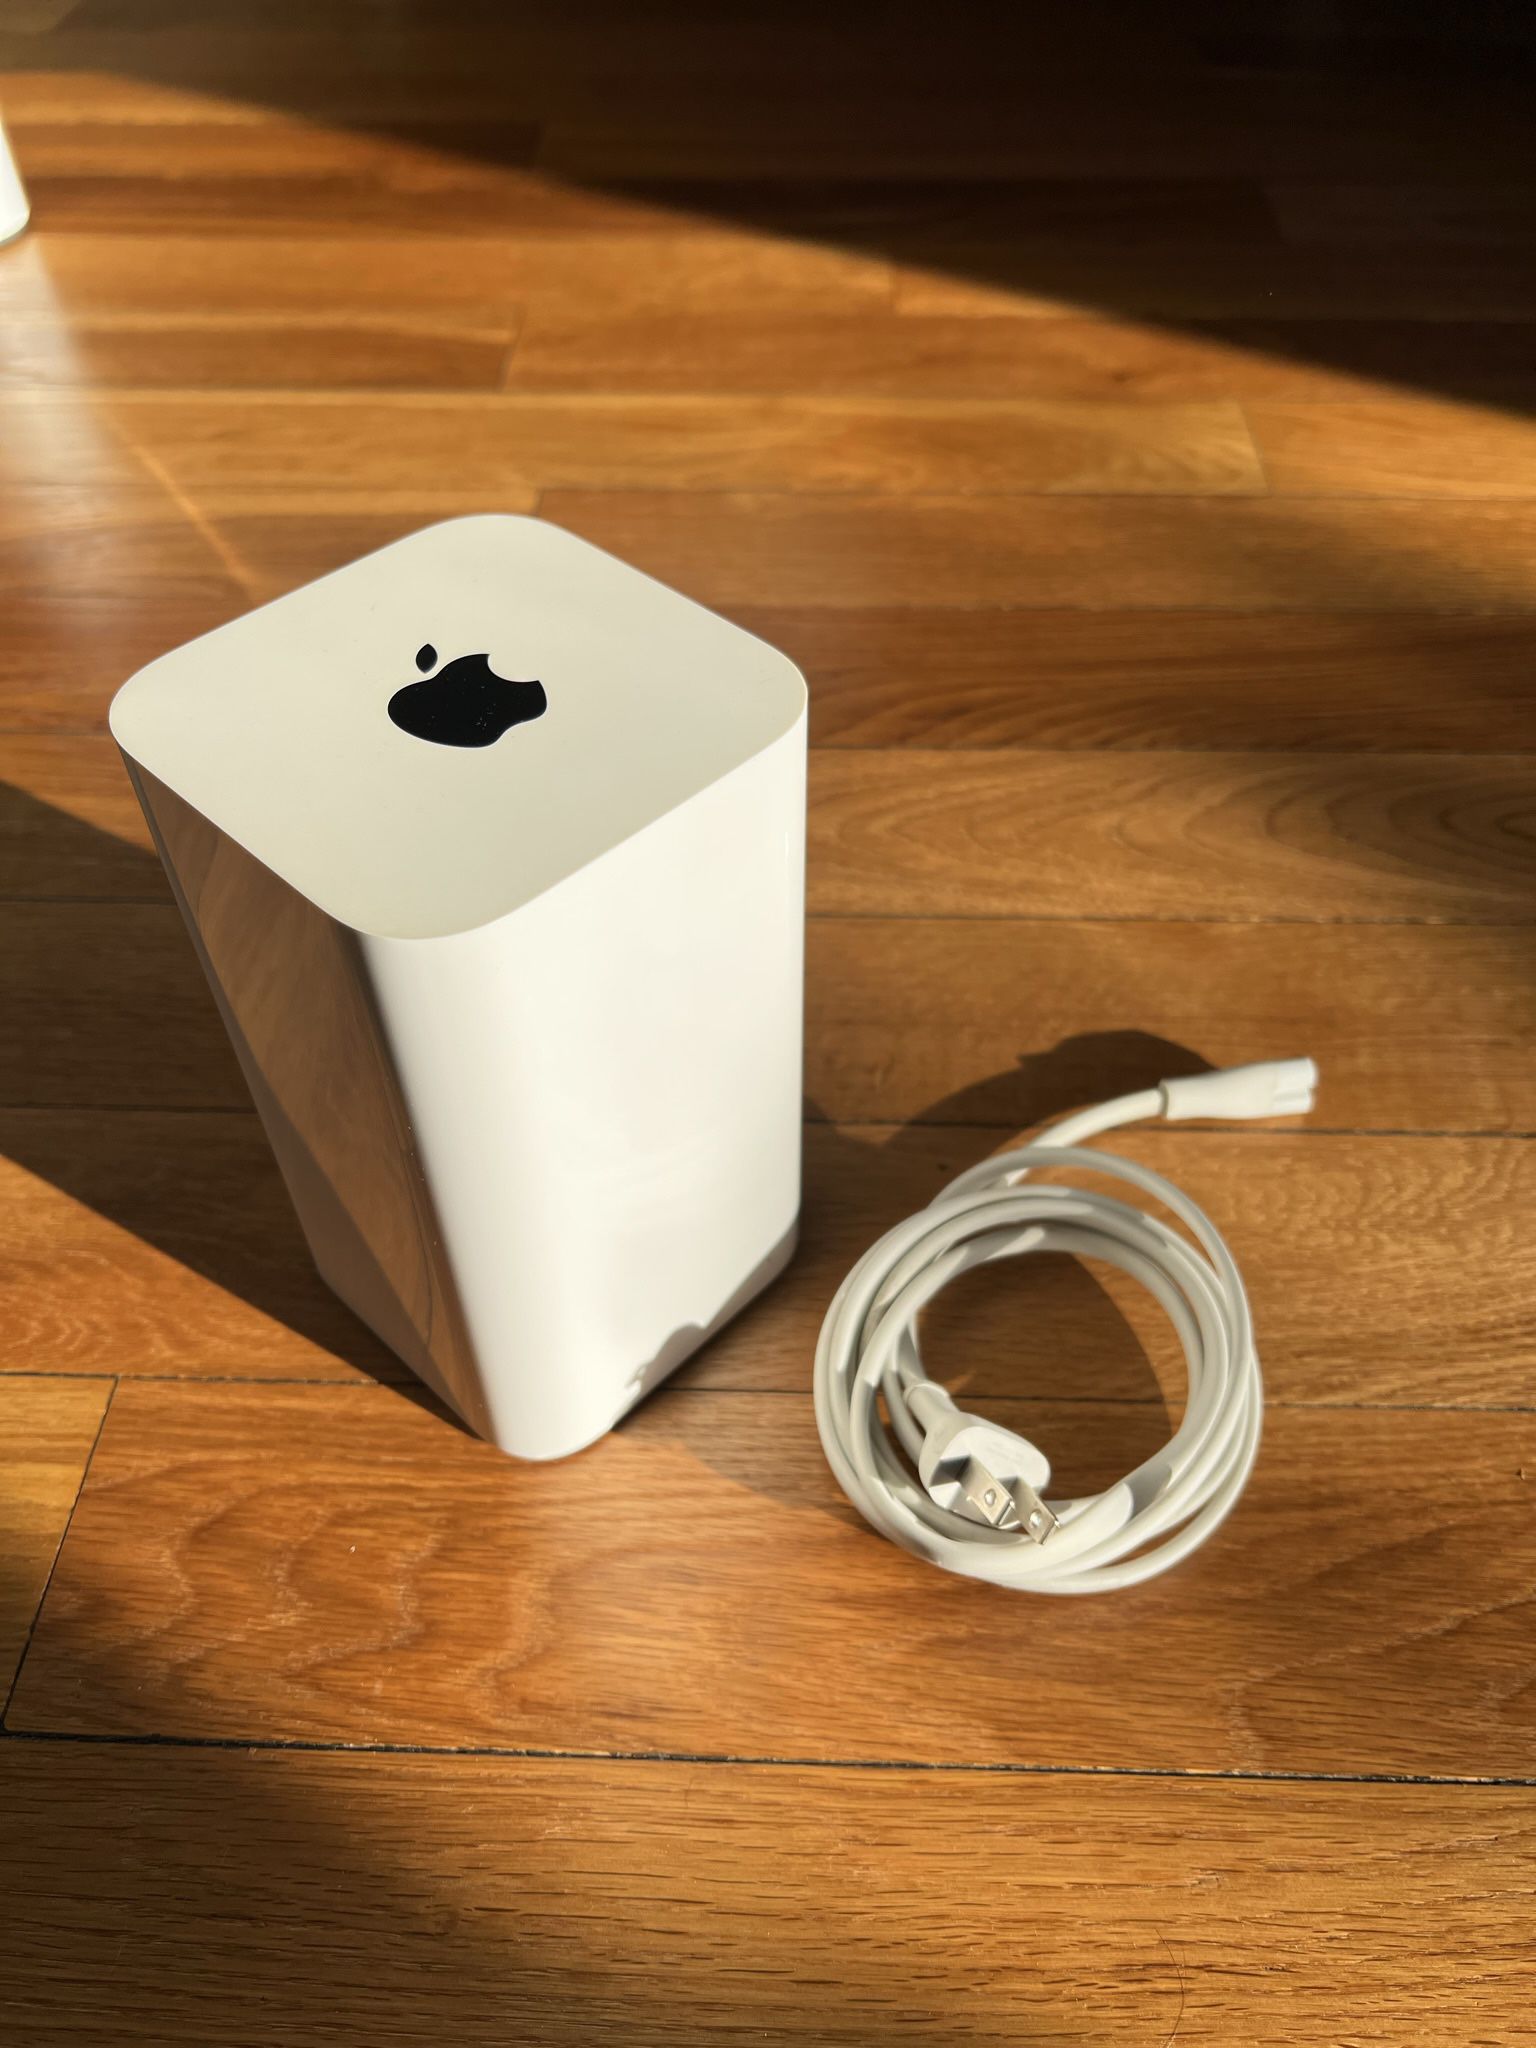 Apple AirPort Extreme A1521 WiFi Router